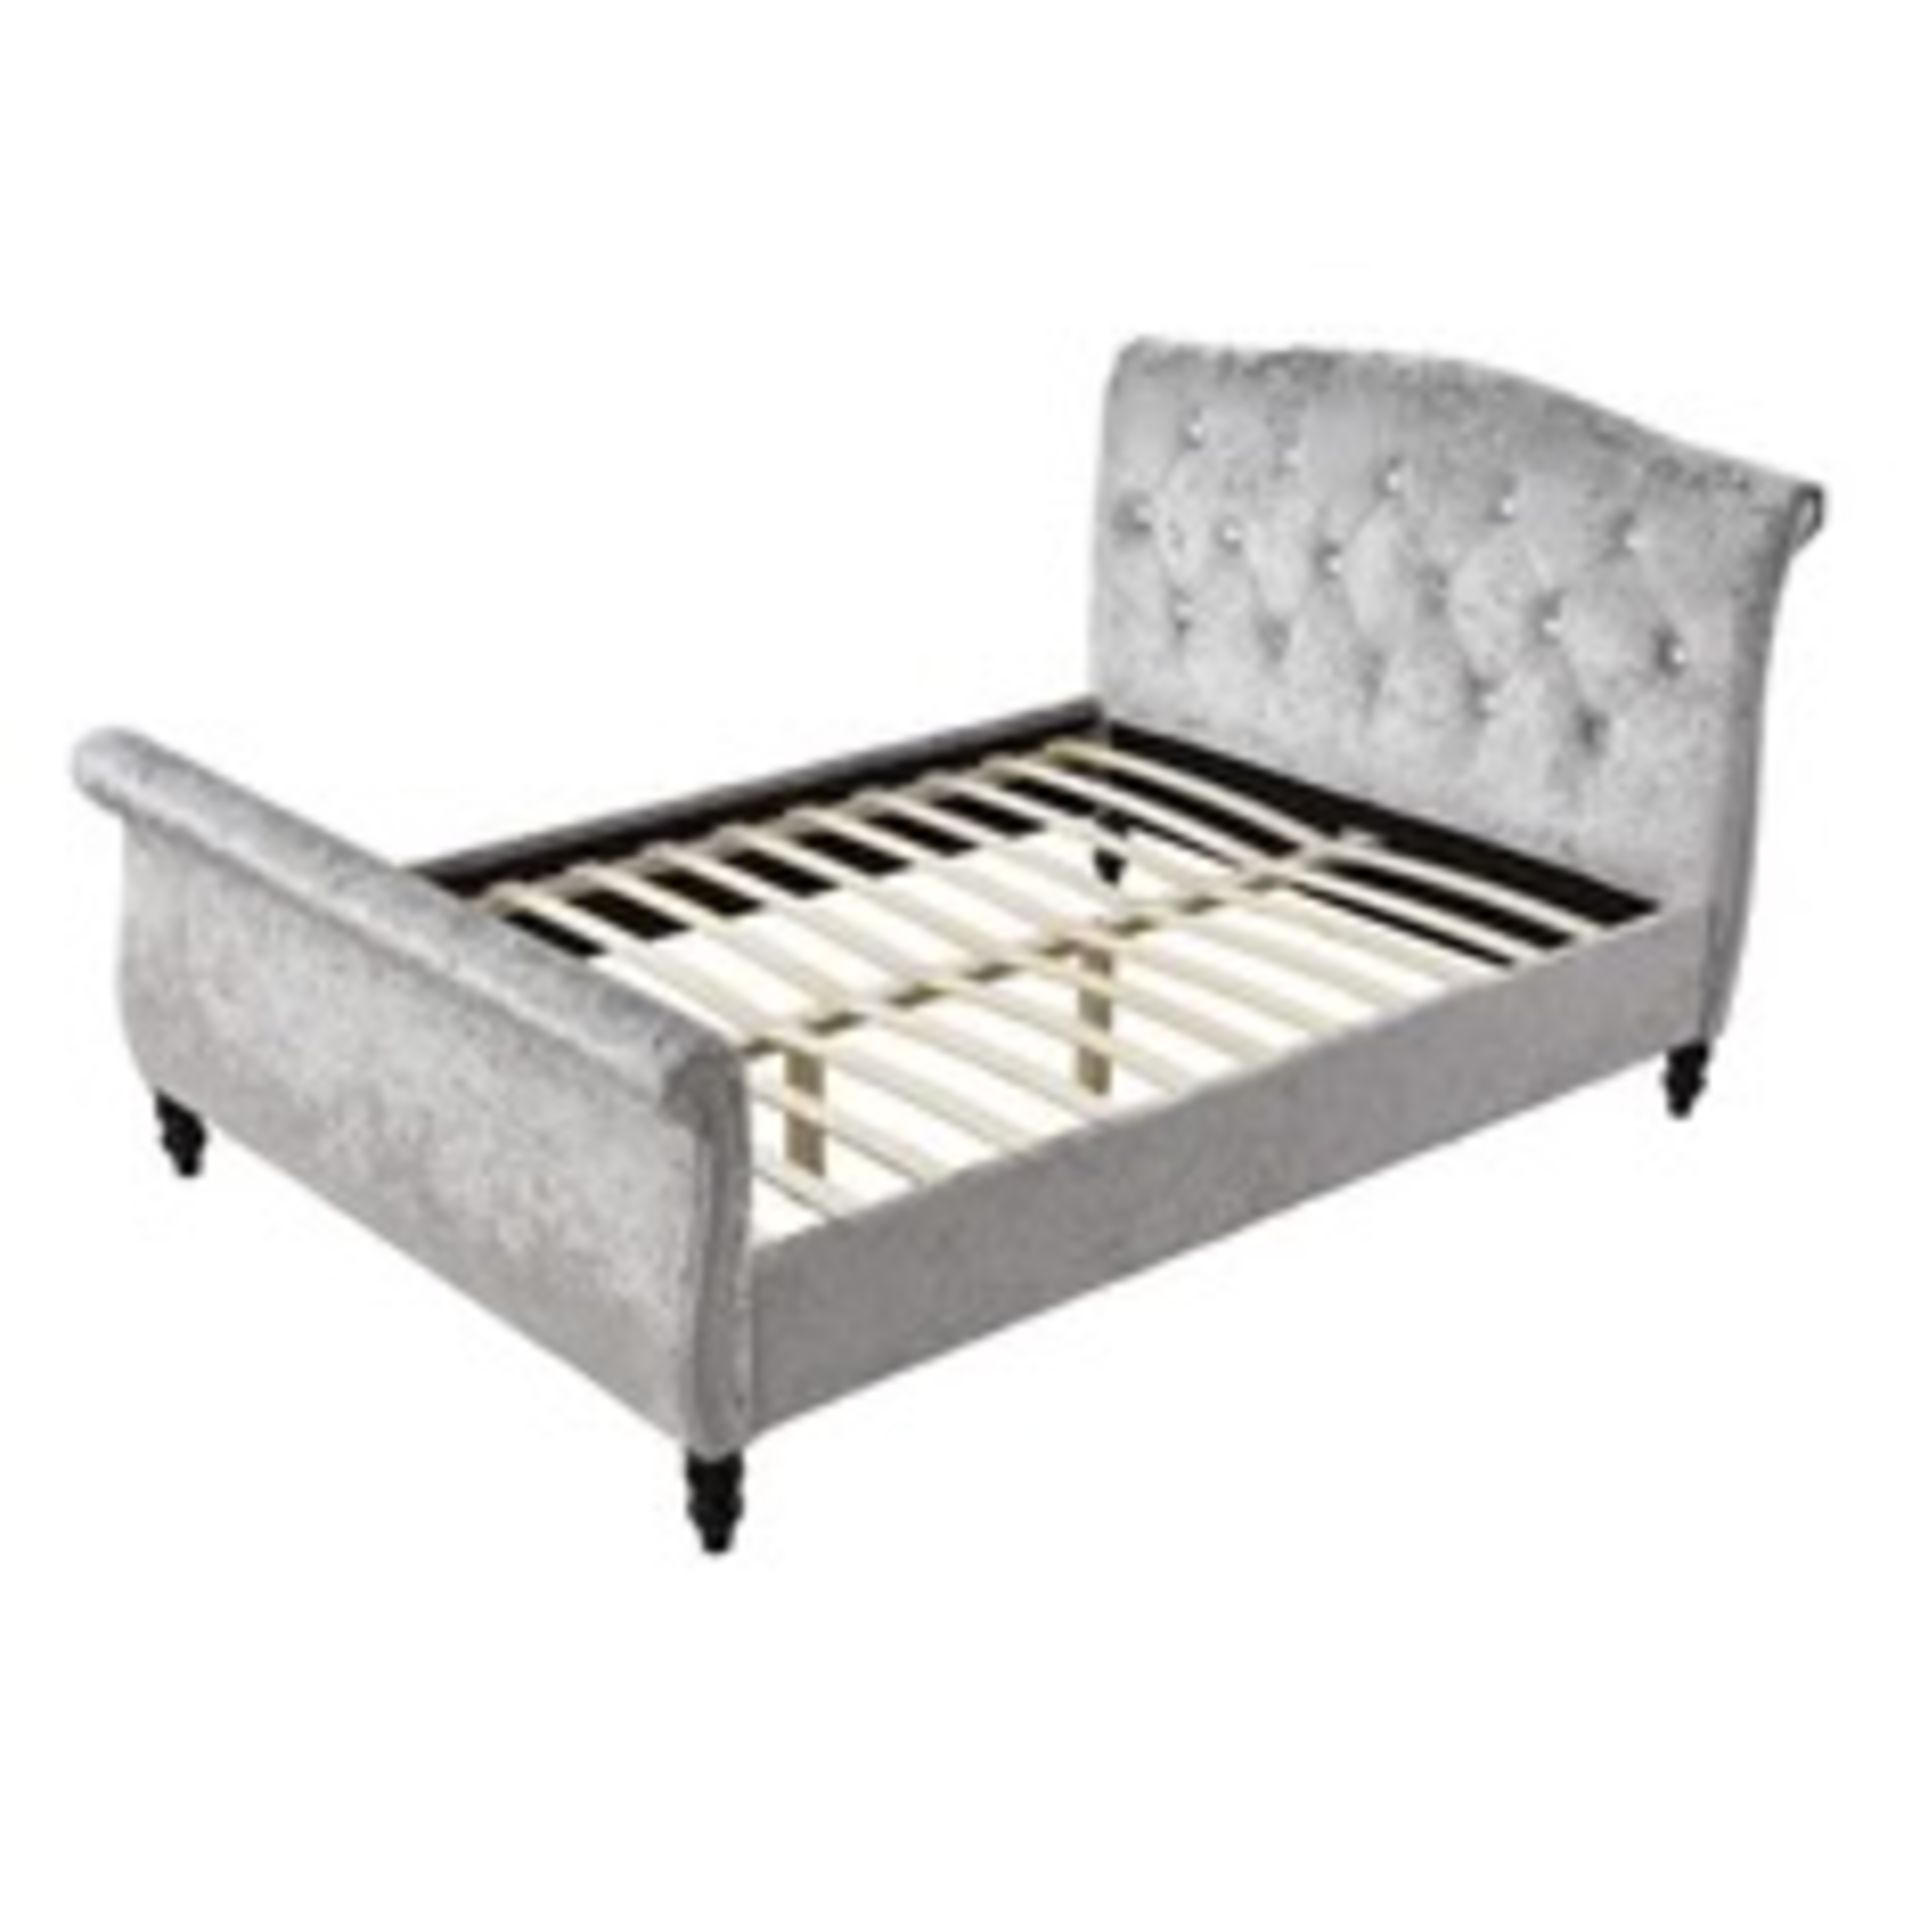 10 X DOUBLE MEISSA CRUSHED VELVET UPHOLSTERED SLEIGH BED WITH DIAMANTE HEADBOARD, SILVER - Image 2 of 3